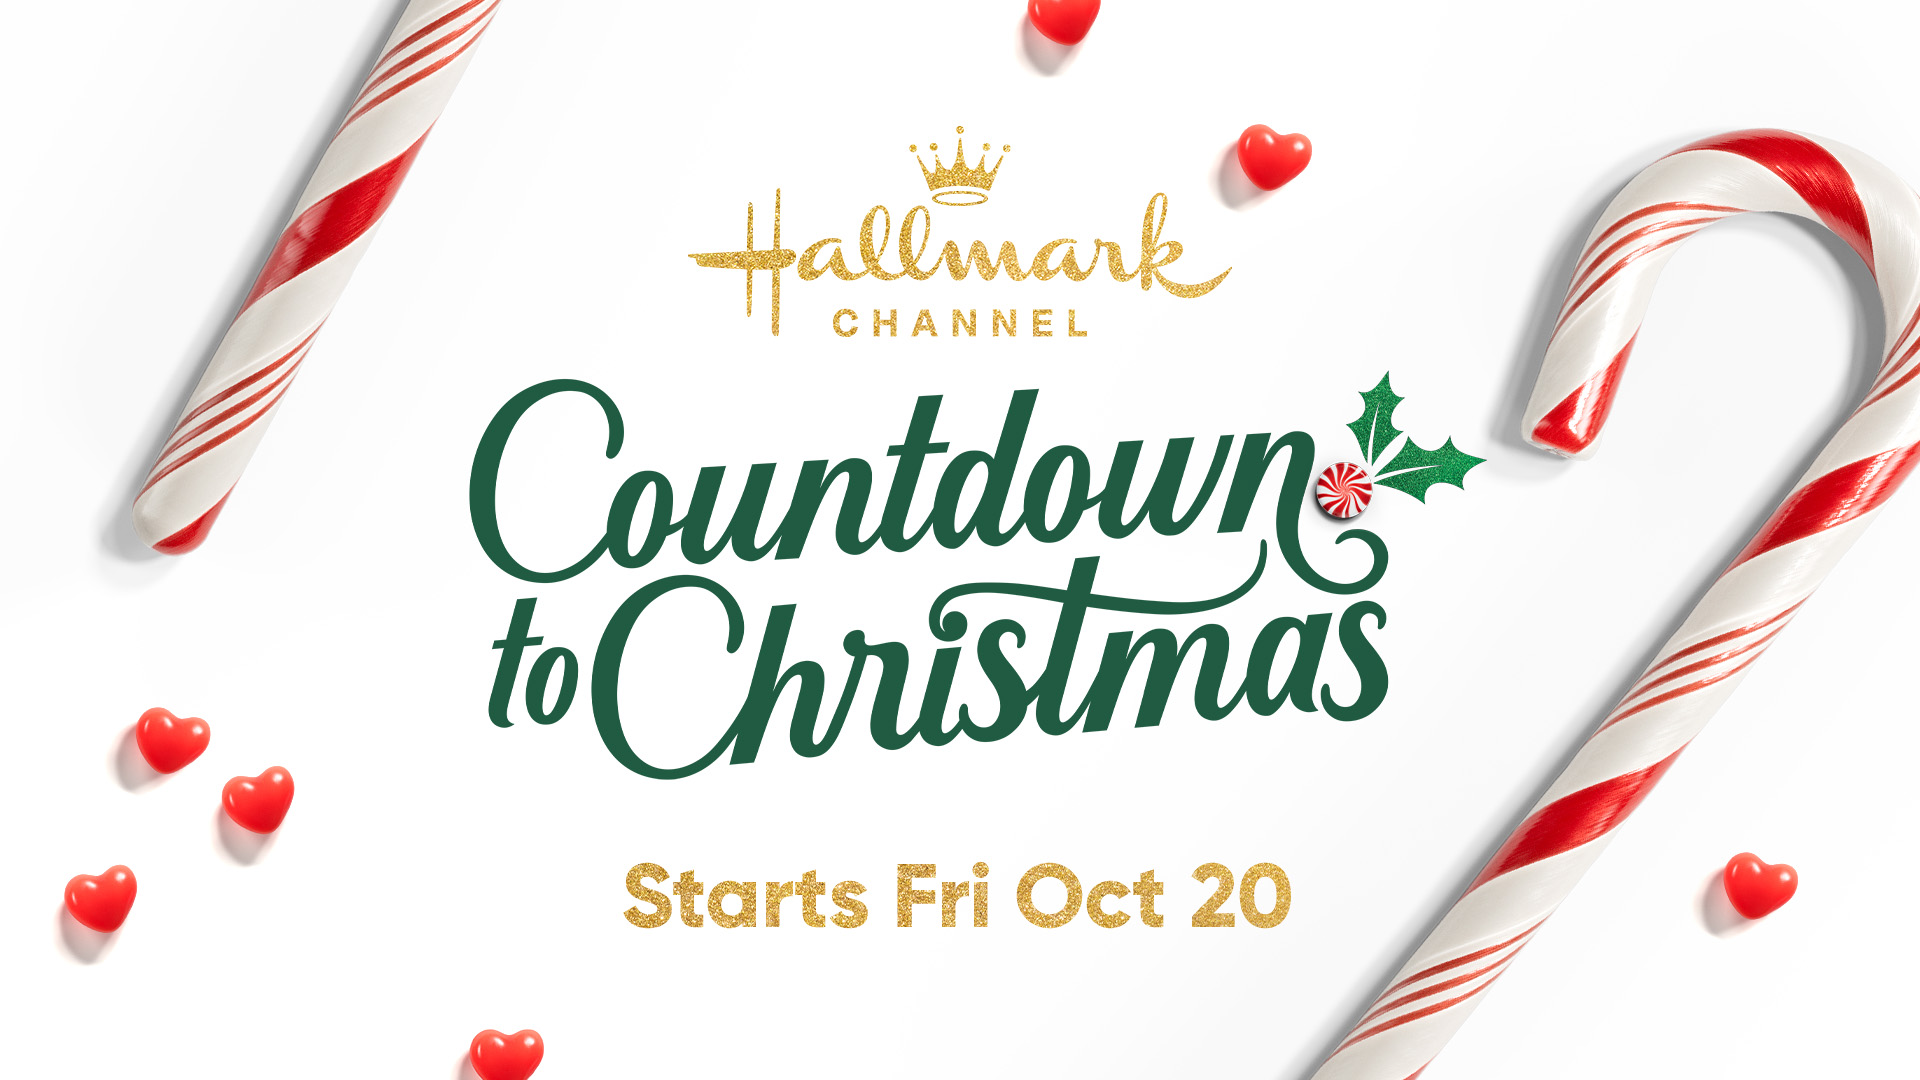 Countdown to Christmas is underway on Hallmark Channel - THE DIG